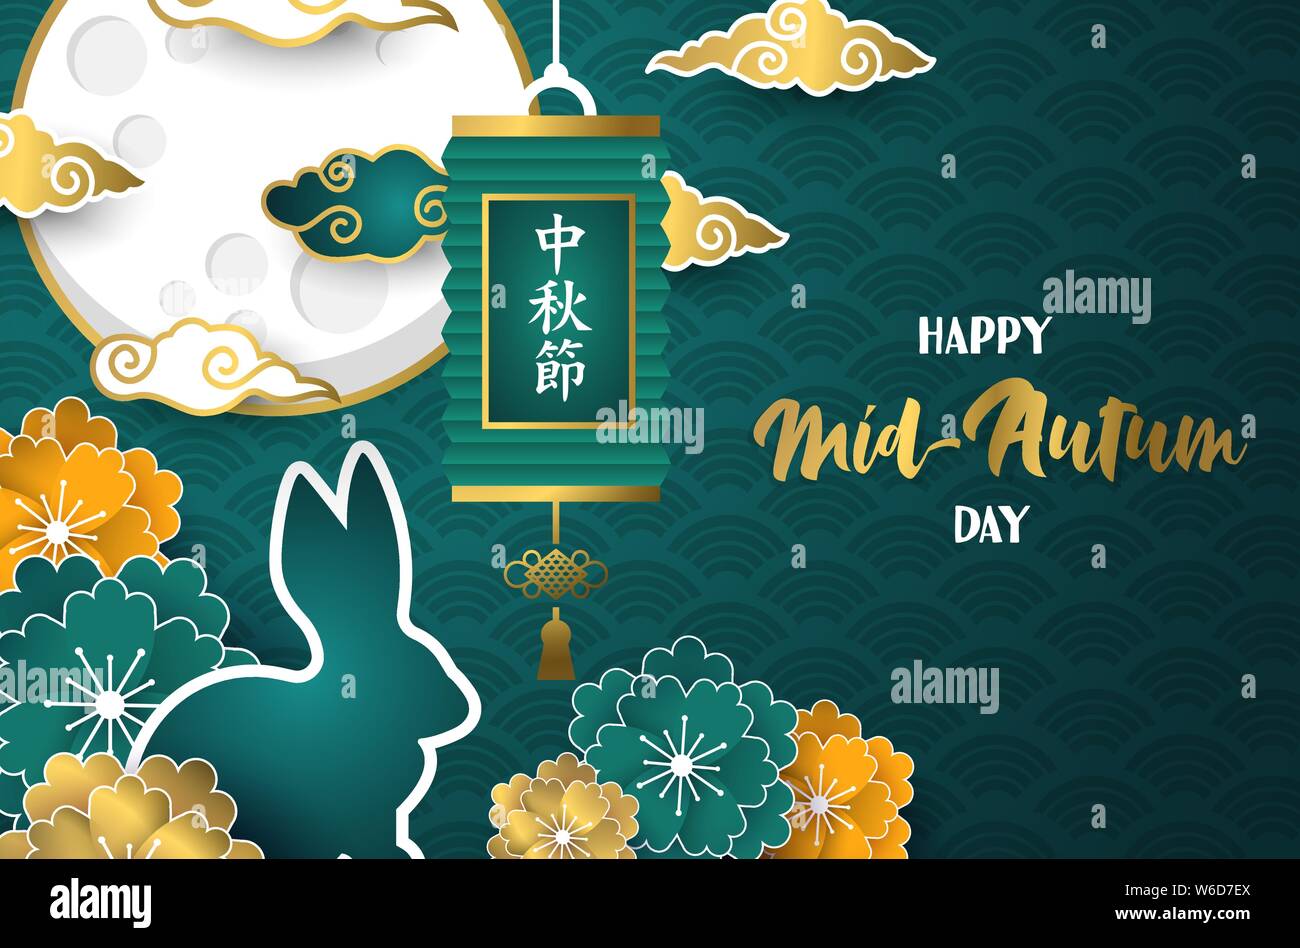 Today is Mid-Autumn Festival!